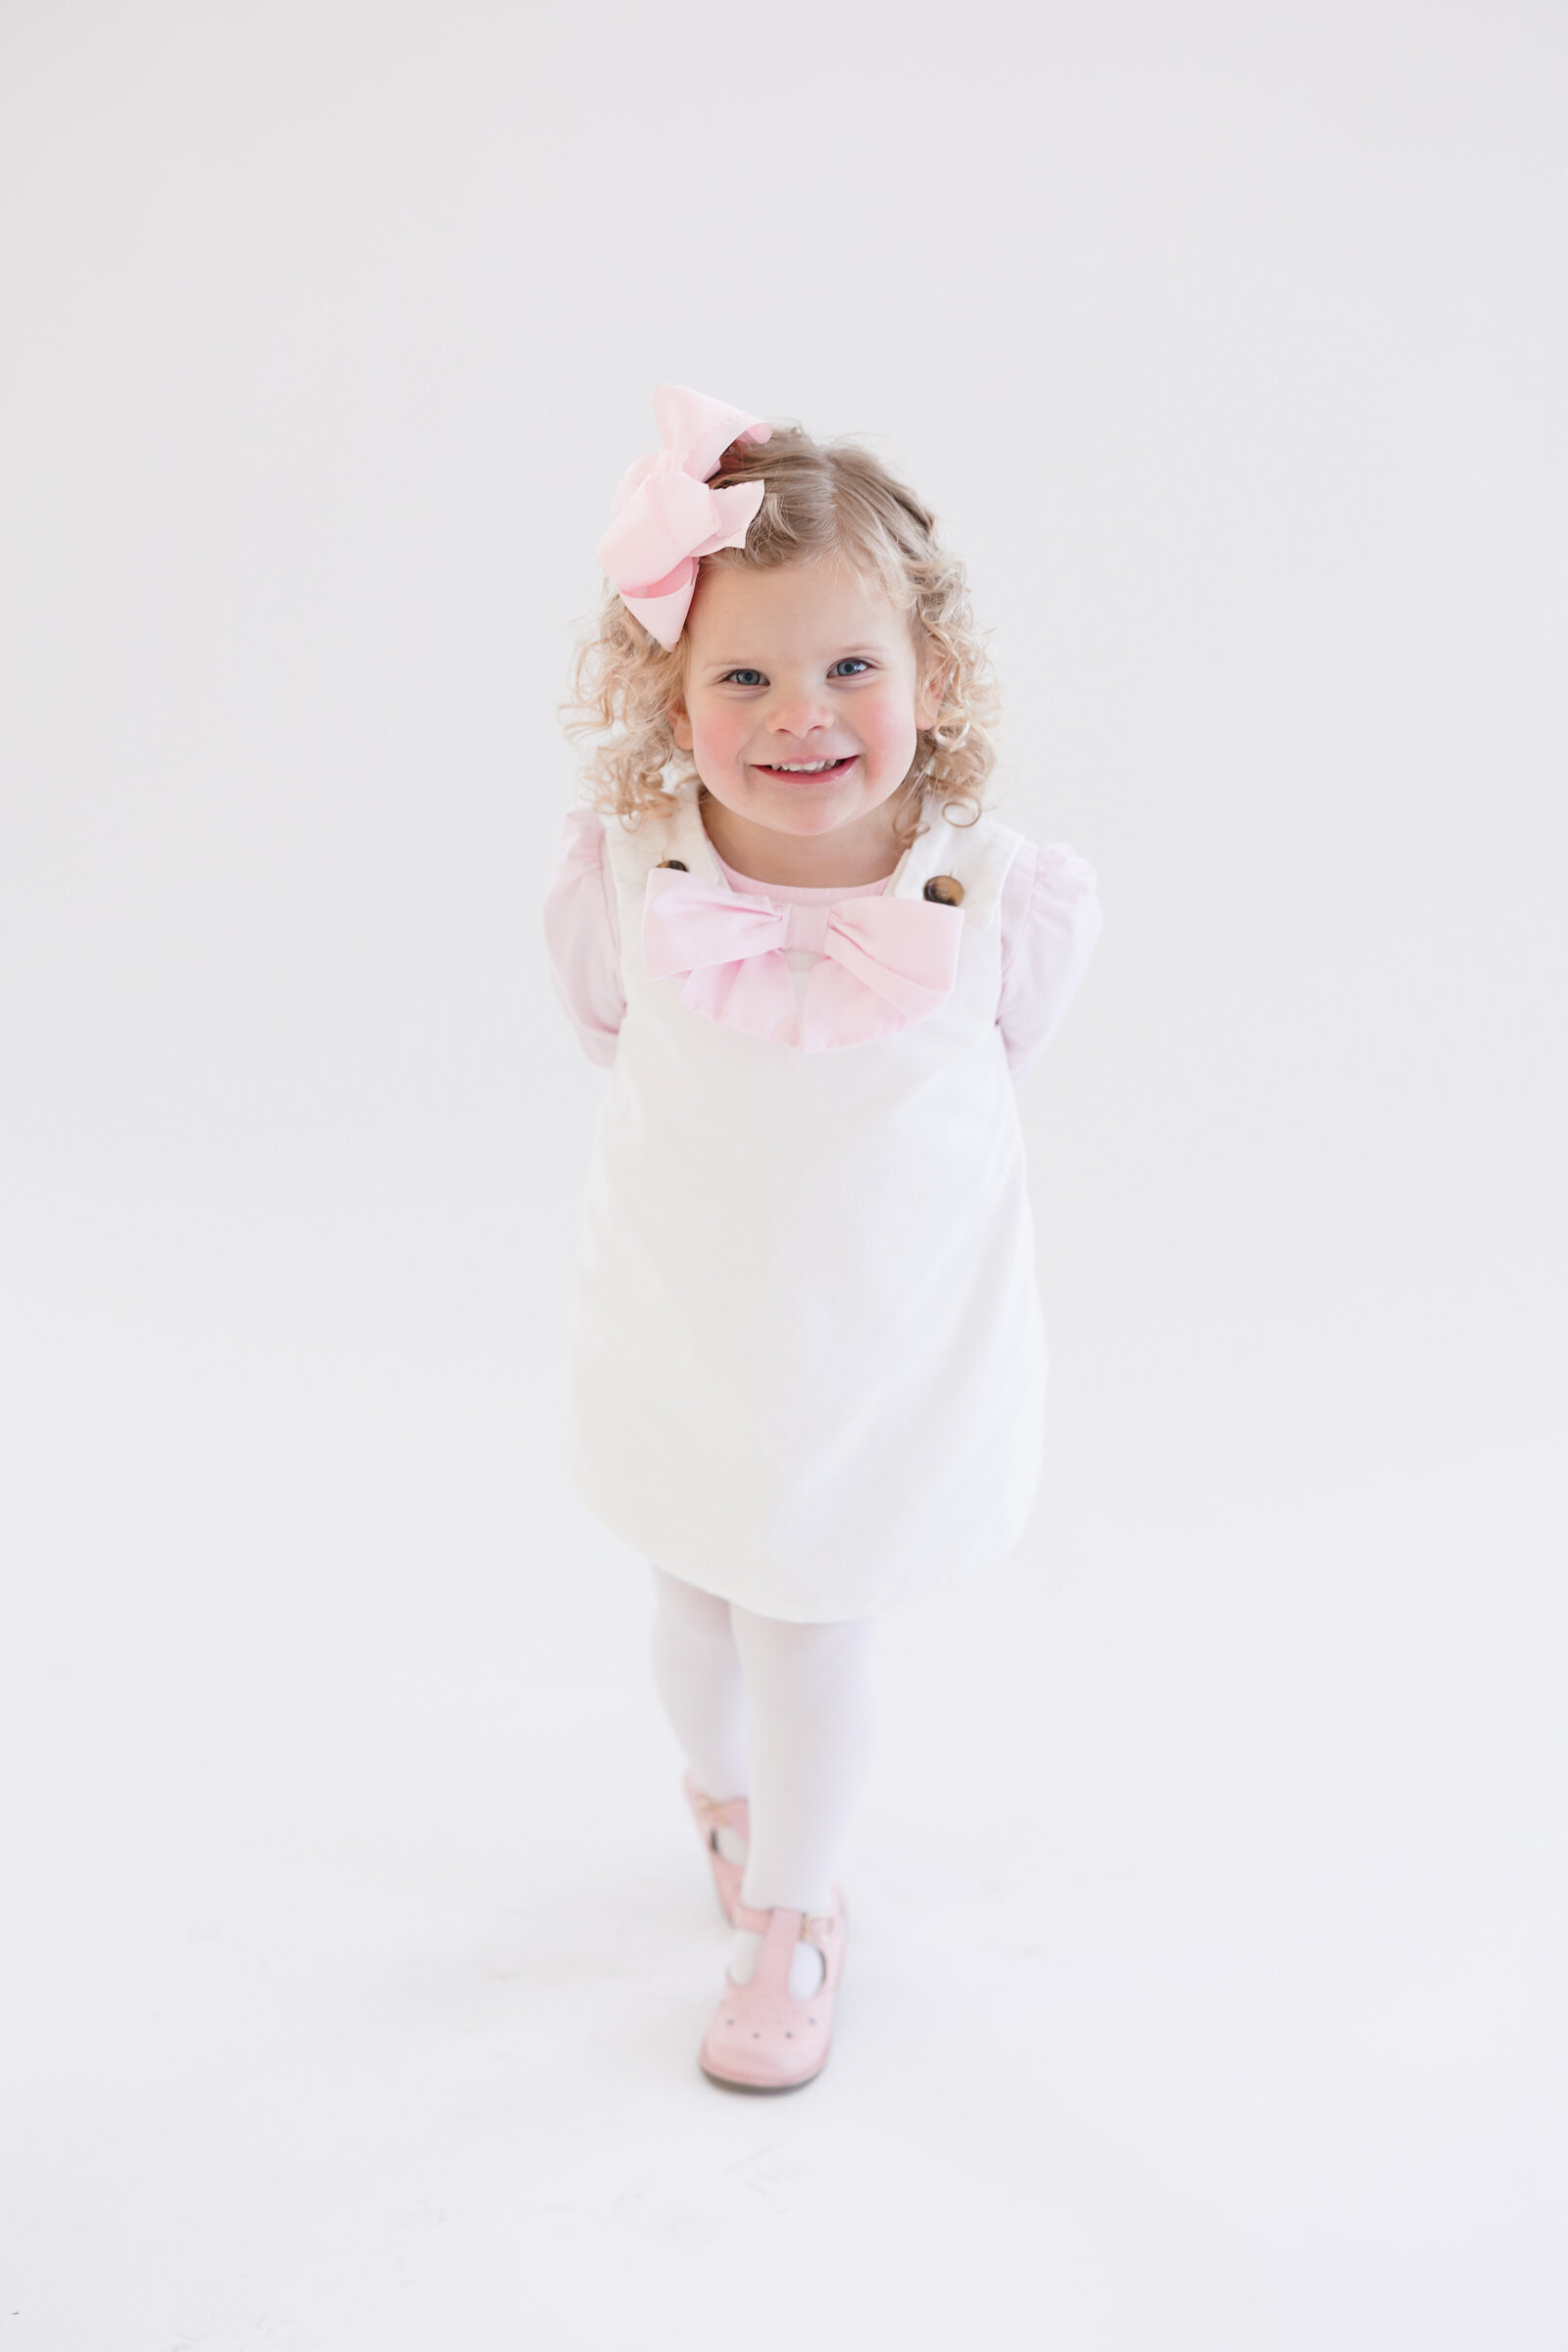 Little girl wearing a white and pink dress with her hands behind her back as she smiles at the camera